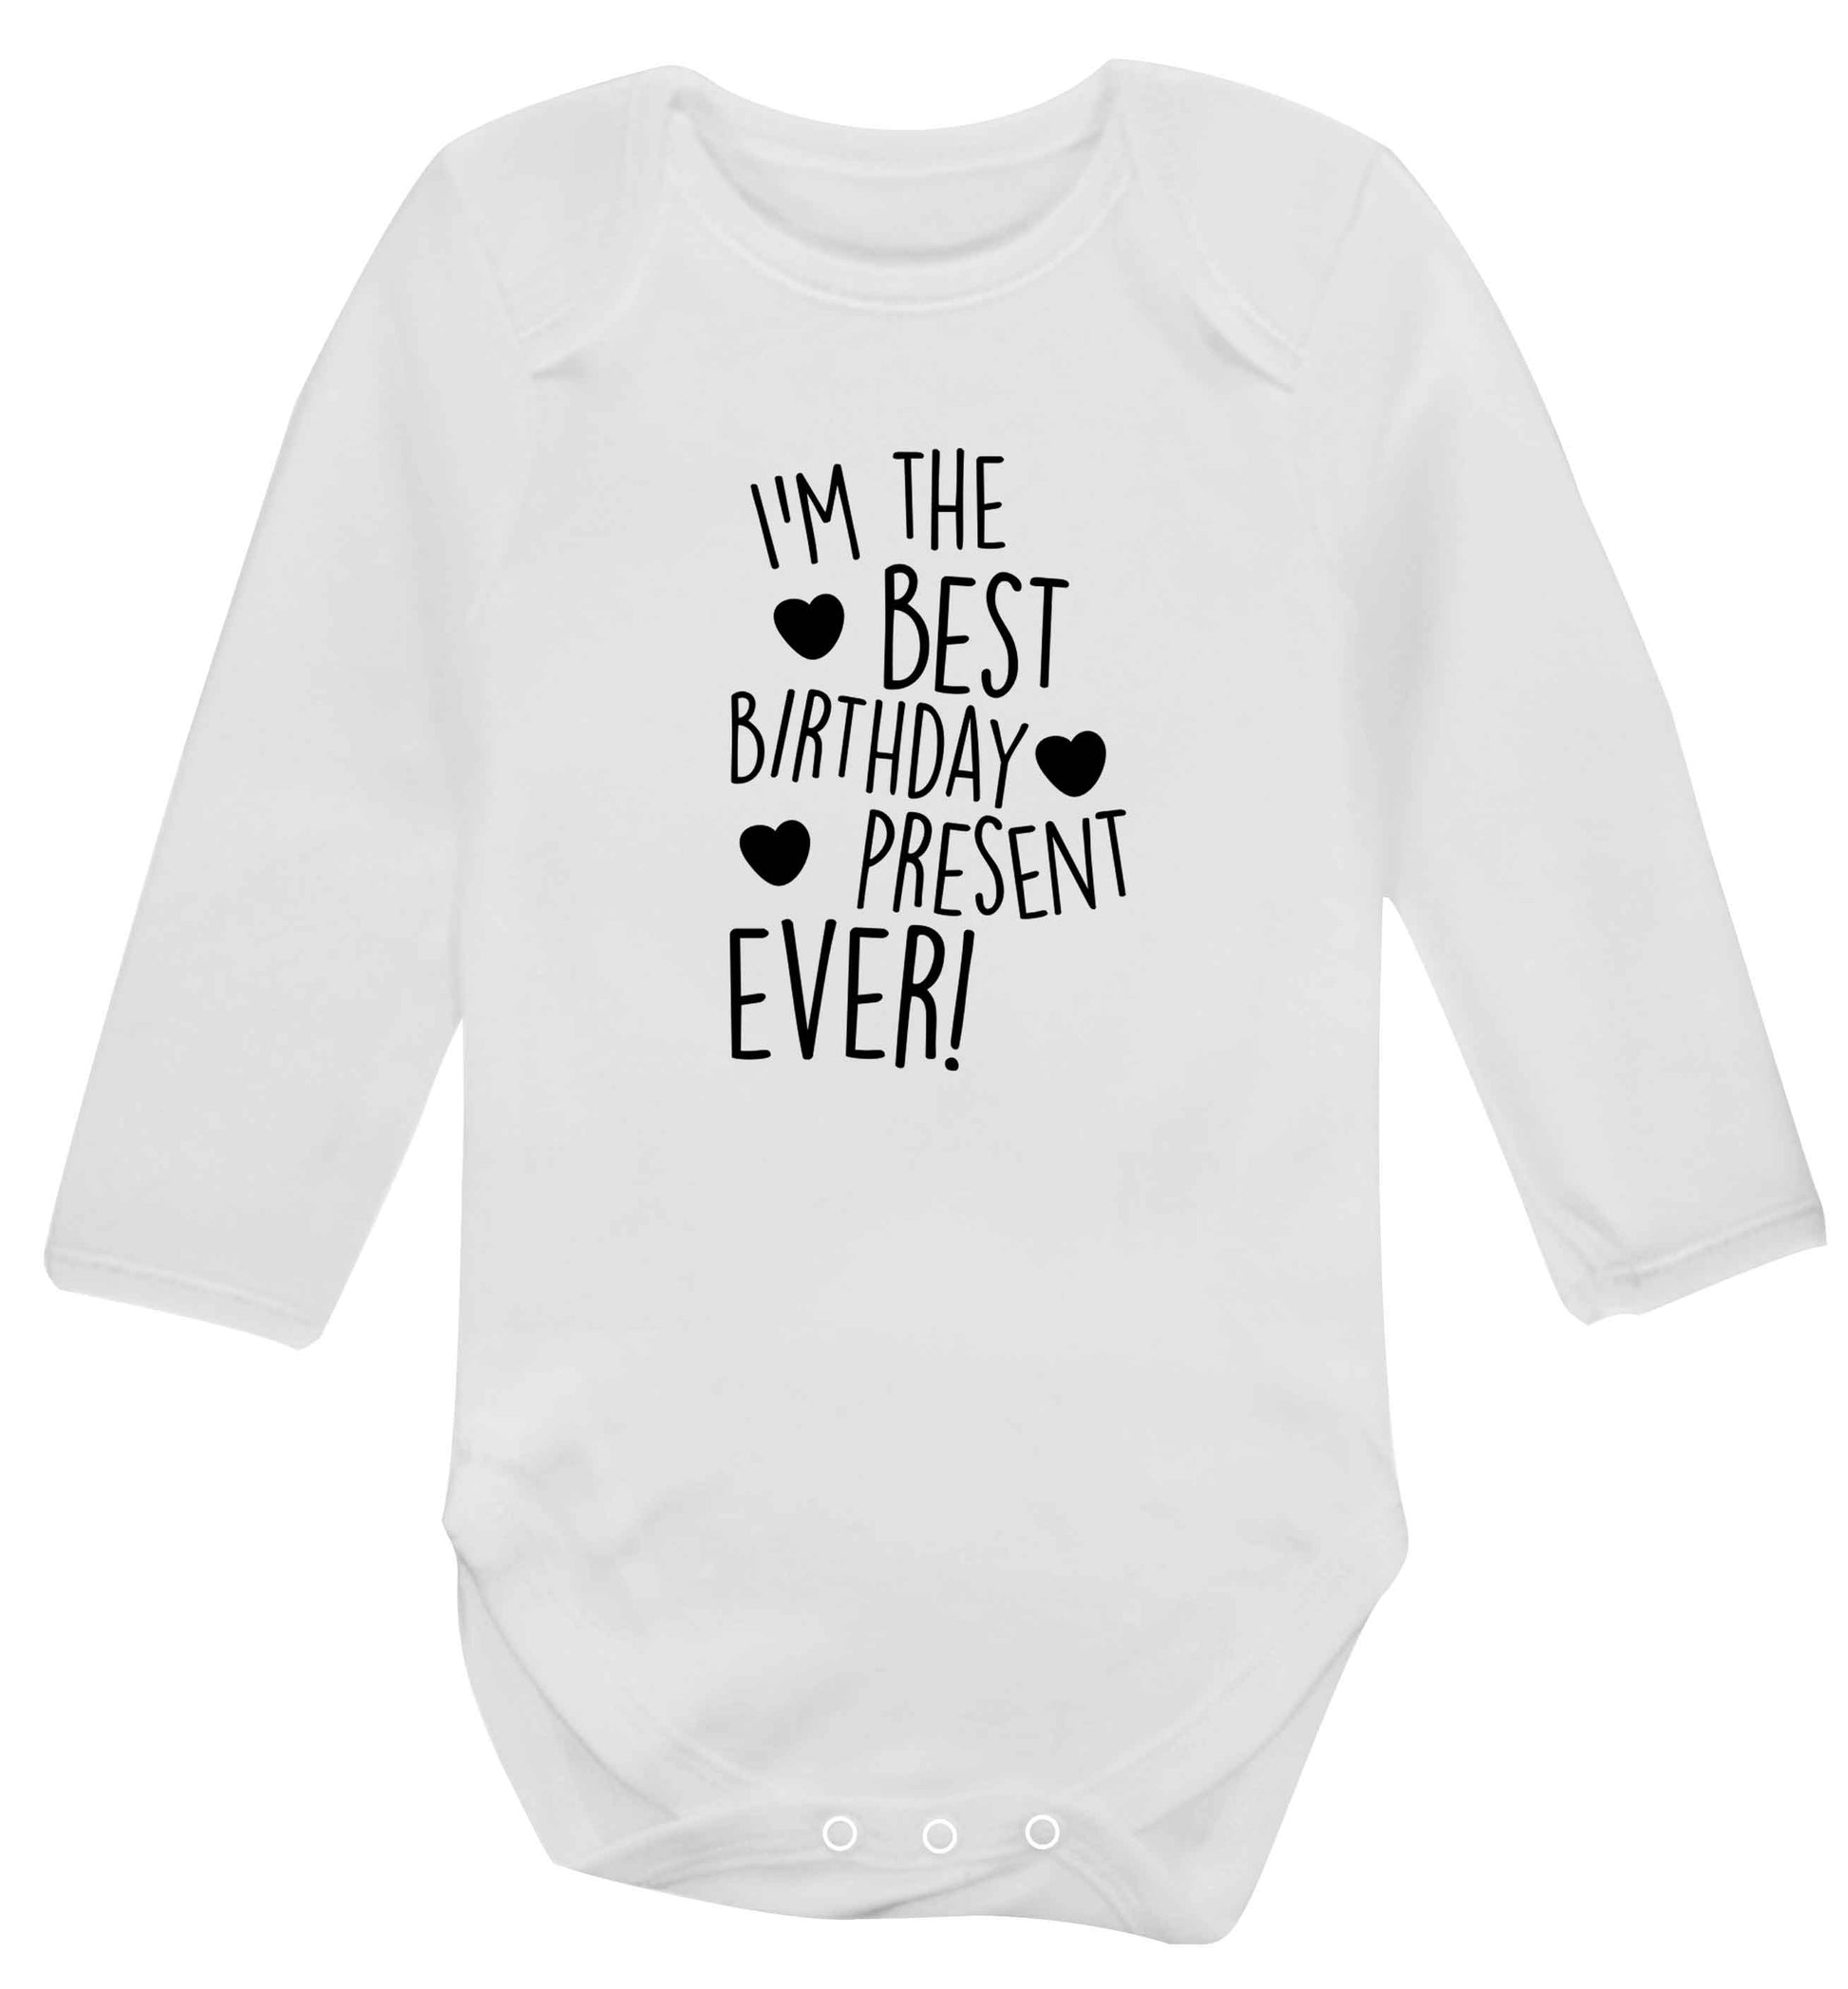 I'm the best birthday present ever baby vest long sleeved white 6-12 months